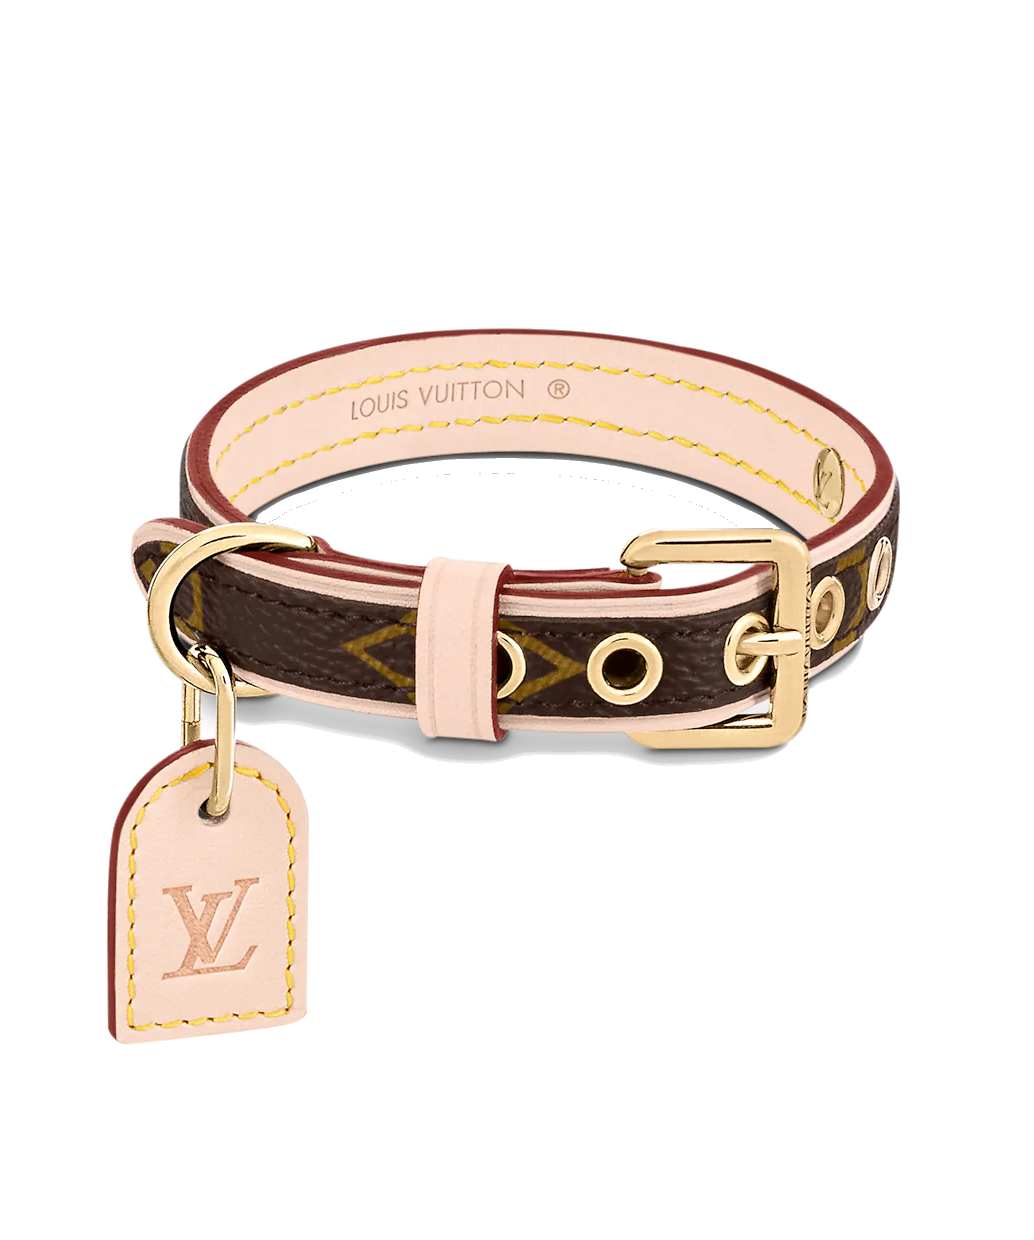 Louis Vuitton pet collar made of leather and adorned with the iconic LV monogram. The collar features a gold-tone buckle and D-ring for attaching a leash.